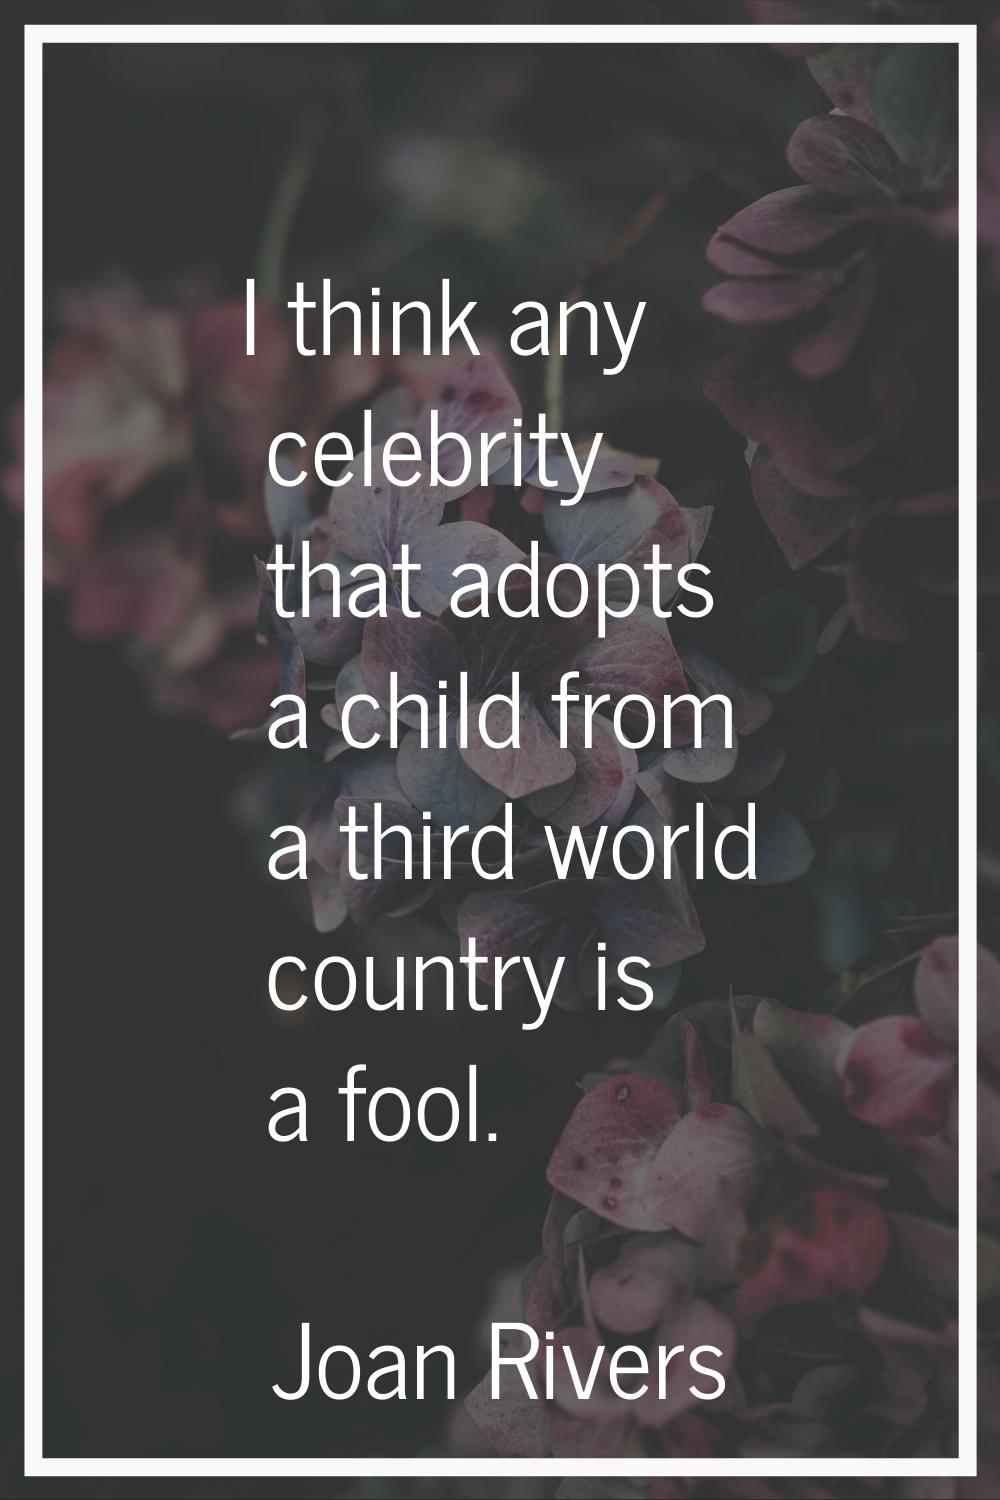 I think any celebrity that adopts a child from a third world country is a fool.